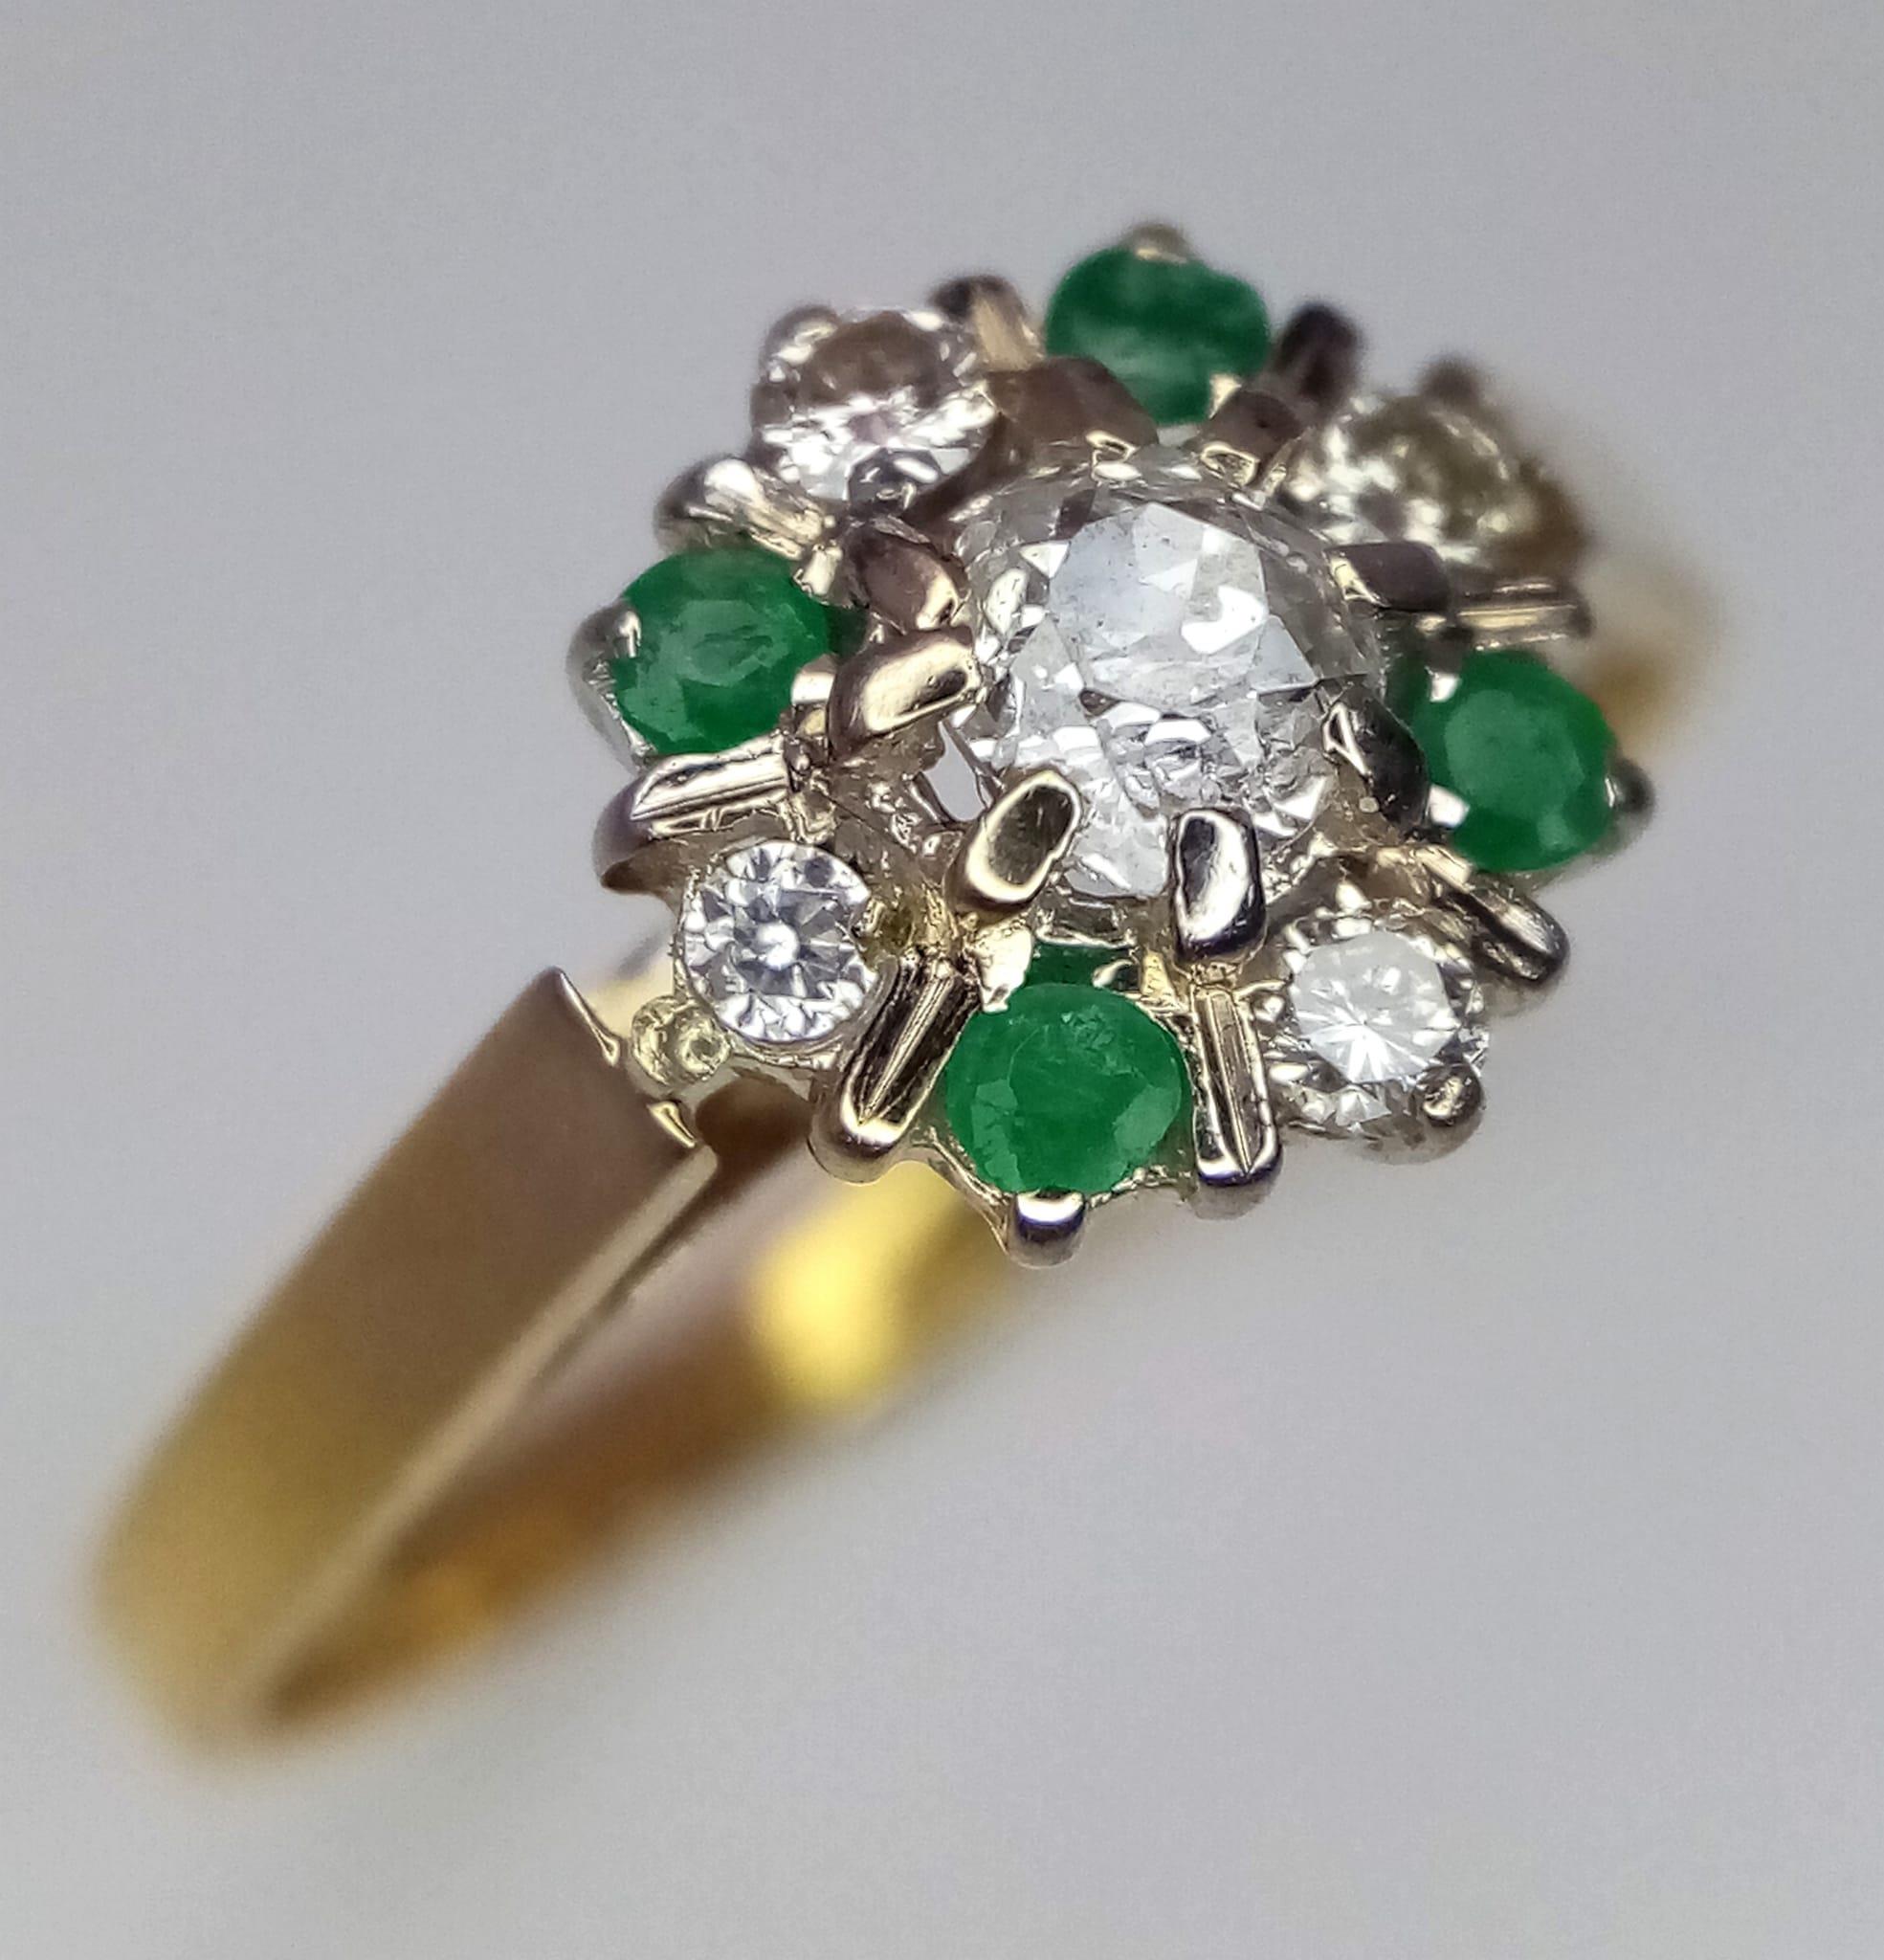 A 9k Yellow Gold Emerald and Diamond Decorative Floral Ring. Size M. 2.14g total weight. - Image 3 of 4